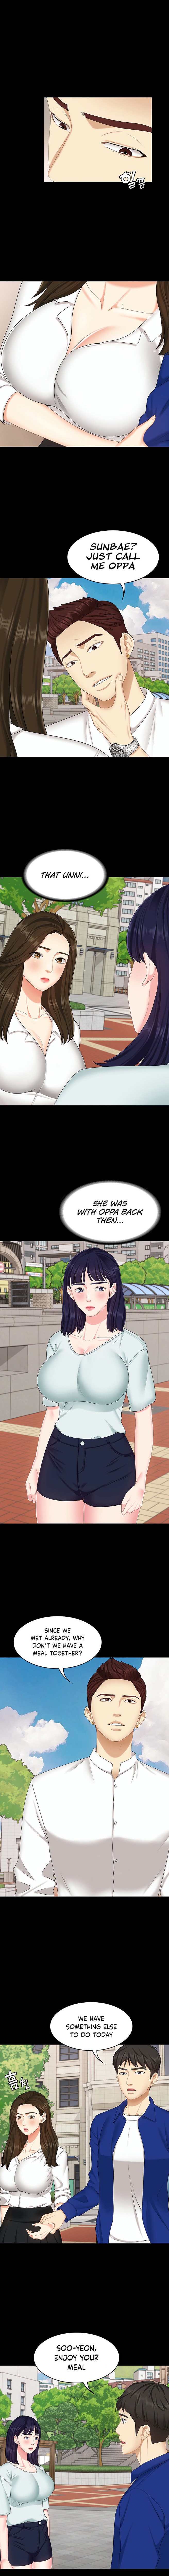 She’s my Younger Sister, but it’s okay - Chapter 9 Page 3